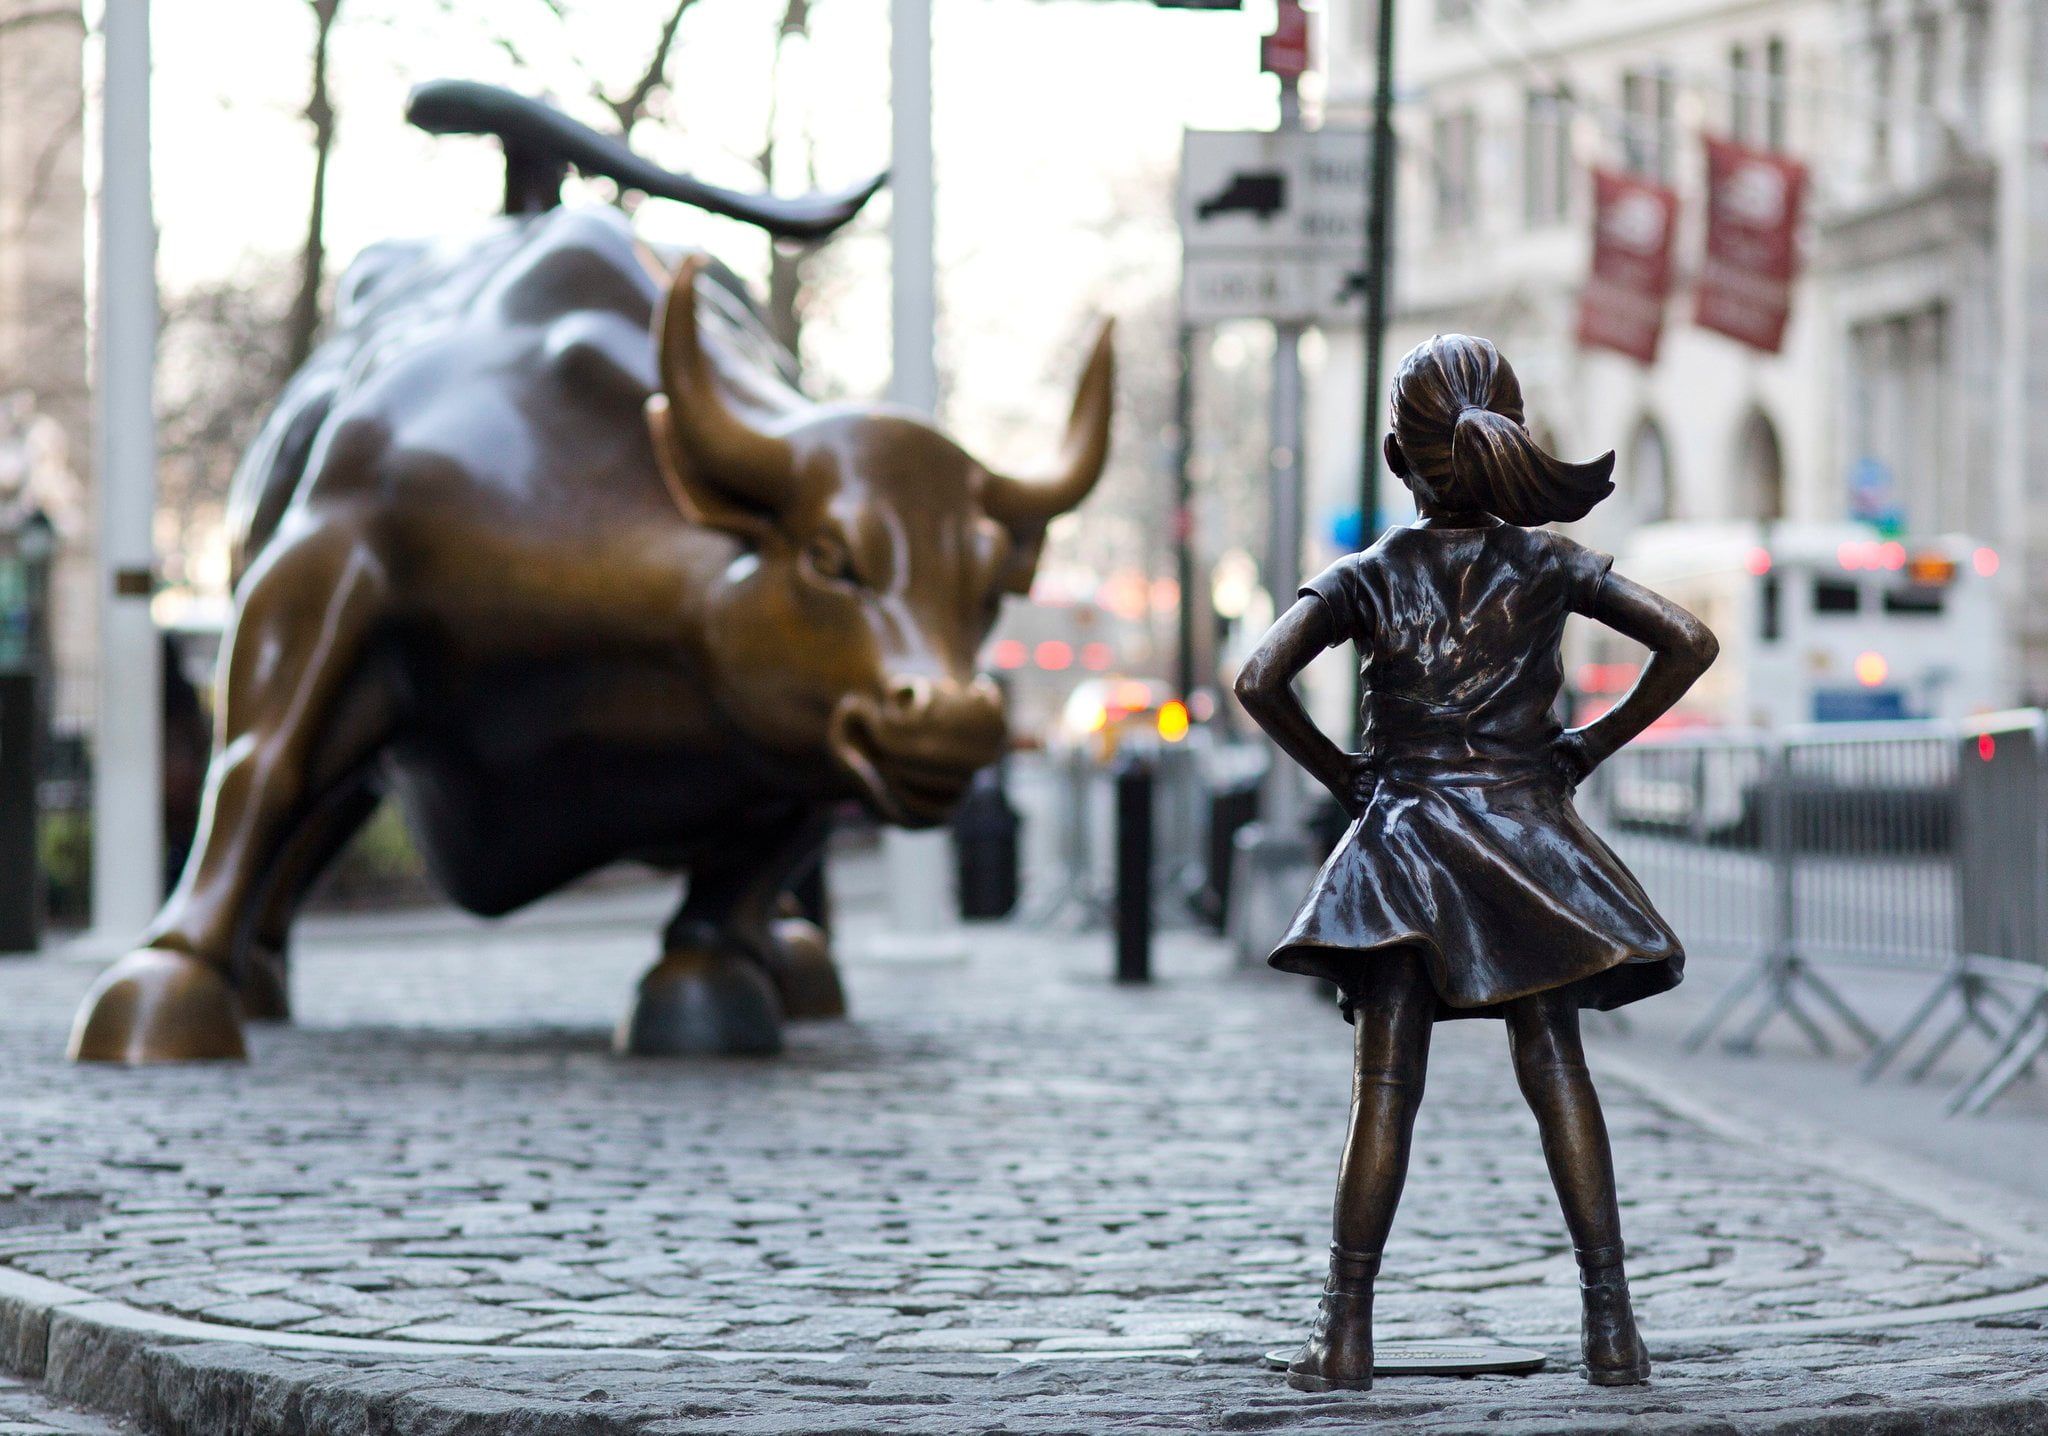 The fearless girl Wall Street